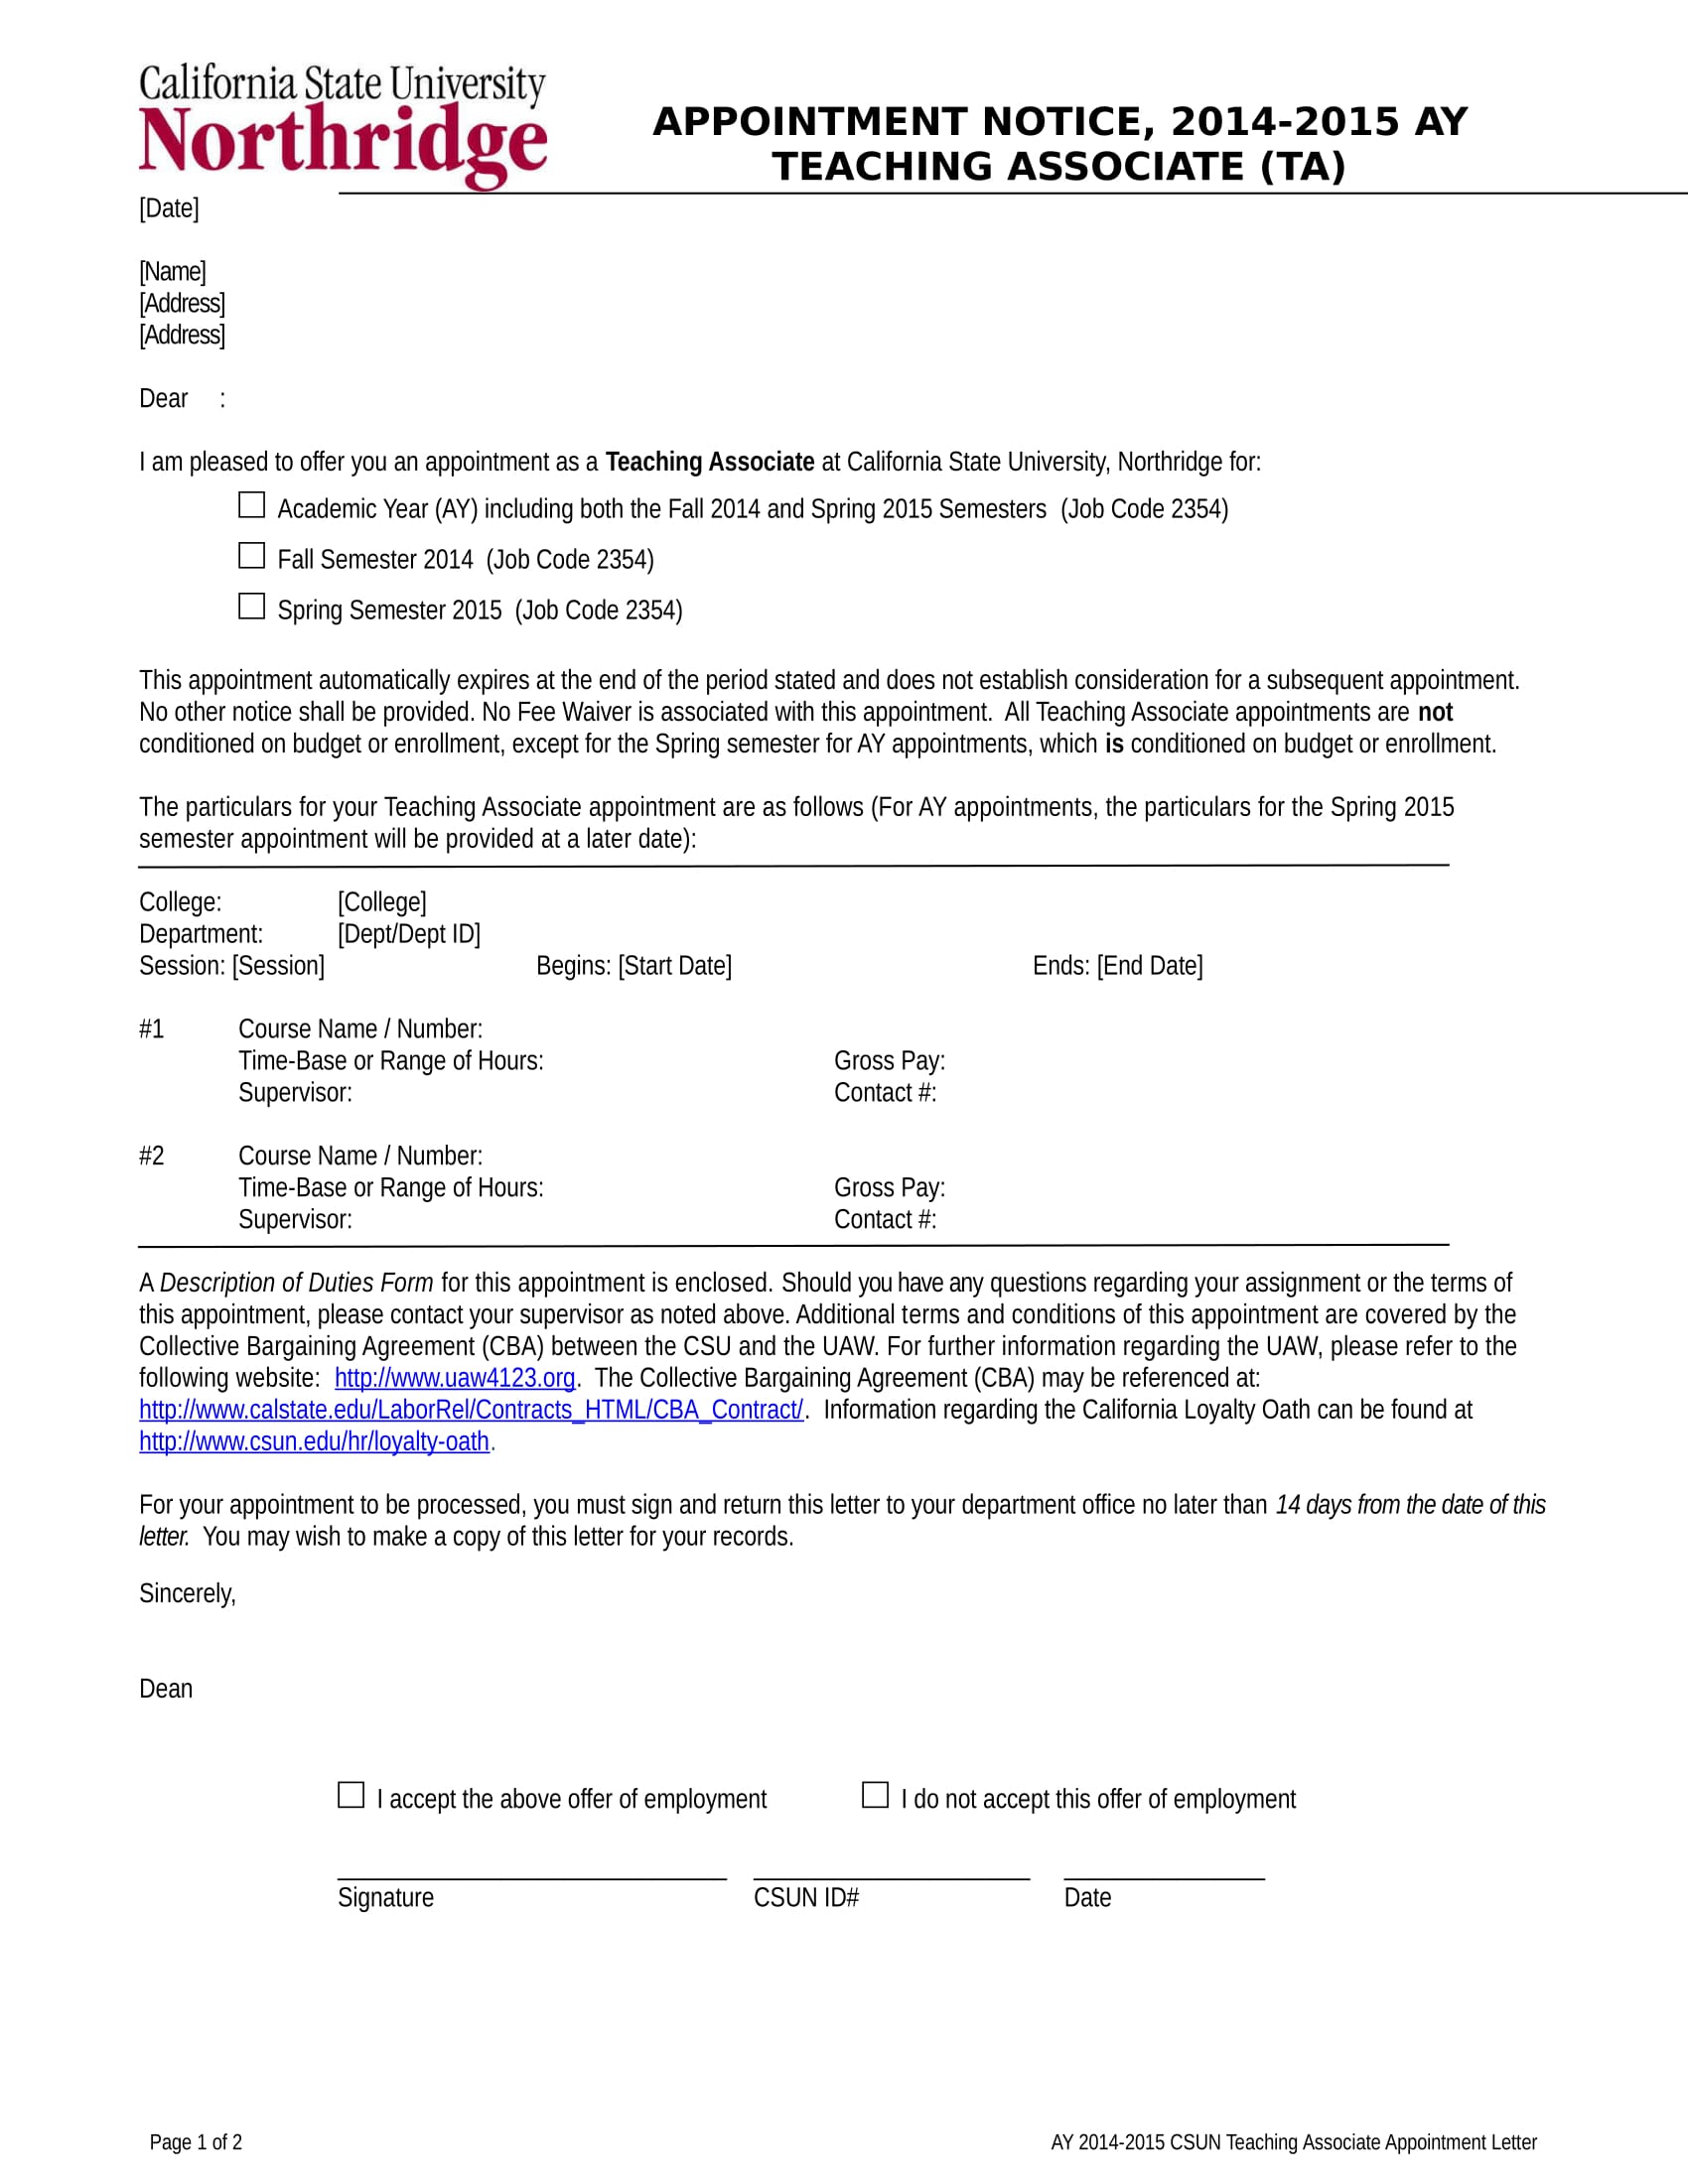 teaching associate appointment letter template sample